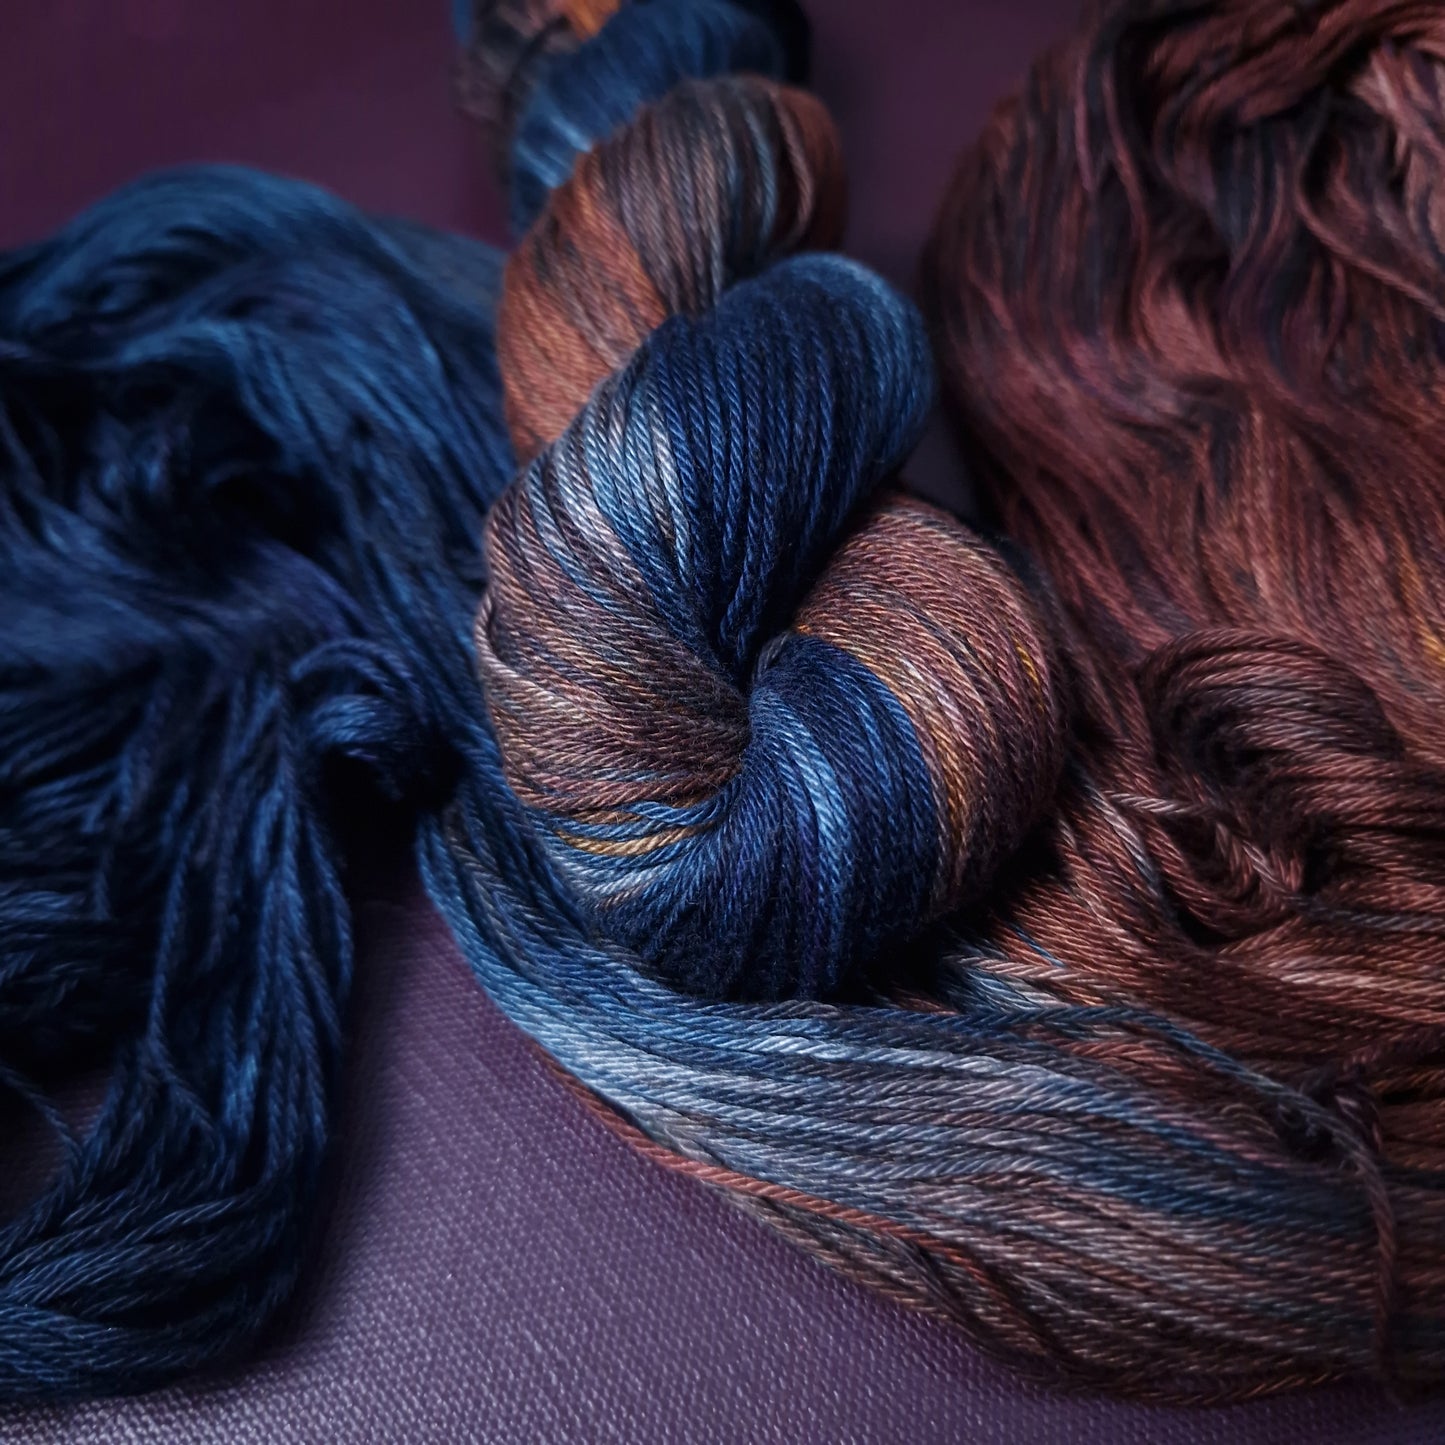 Hand dyed yarn ~ Moody Sunset ~ mercerized cotton yarn, vegan, hand painted, indie dyed